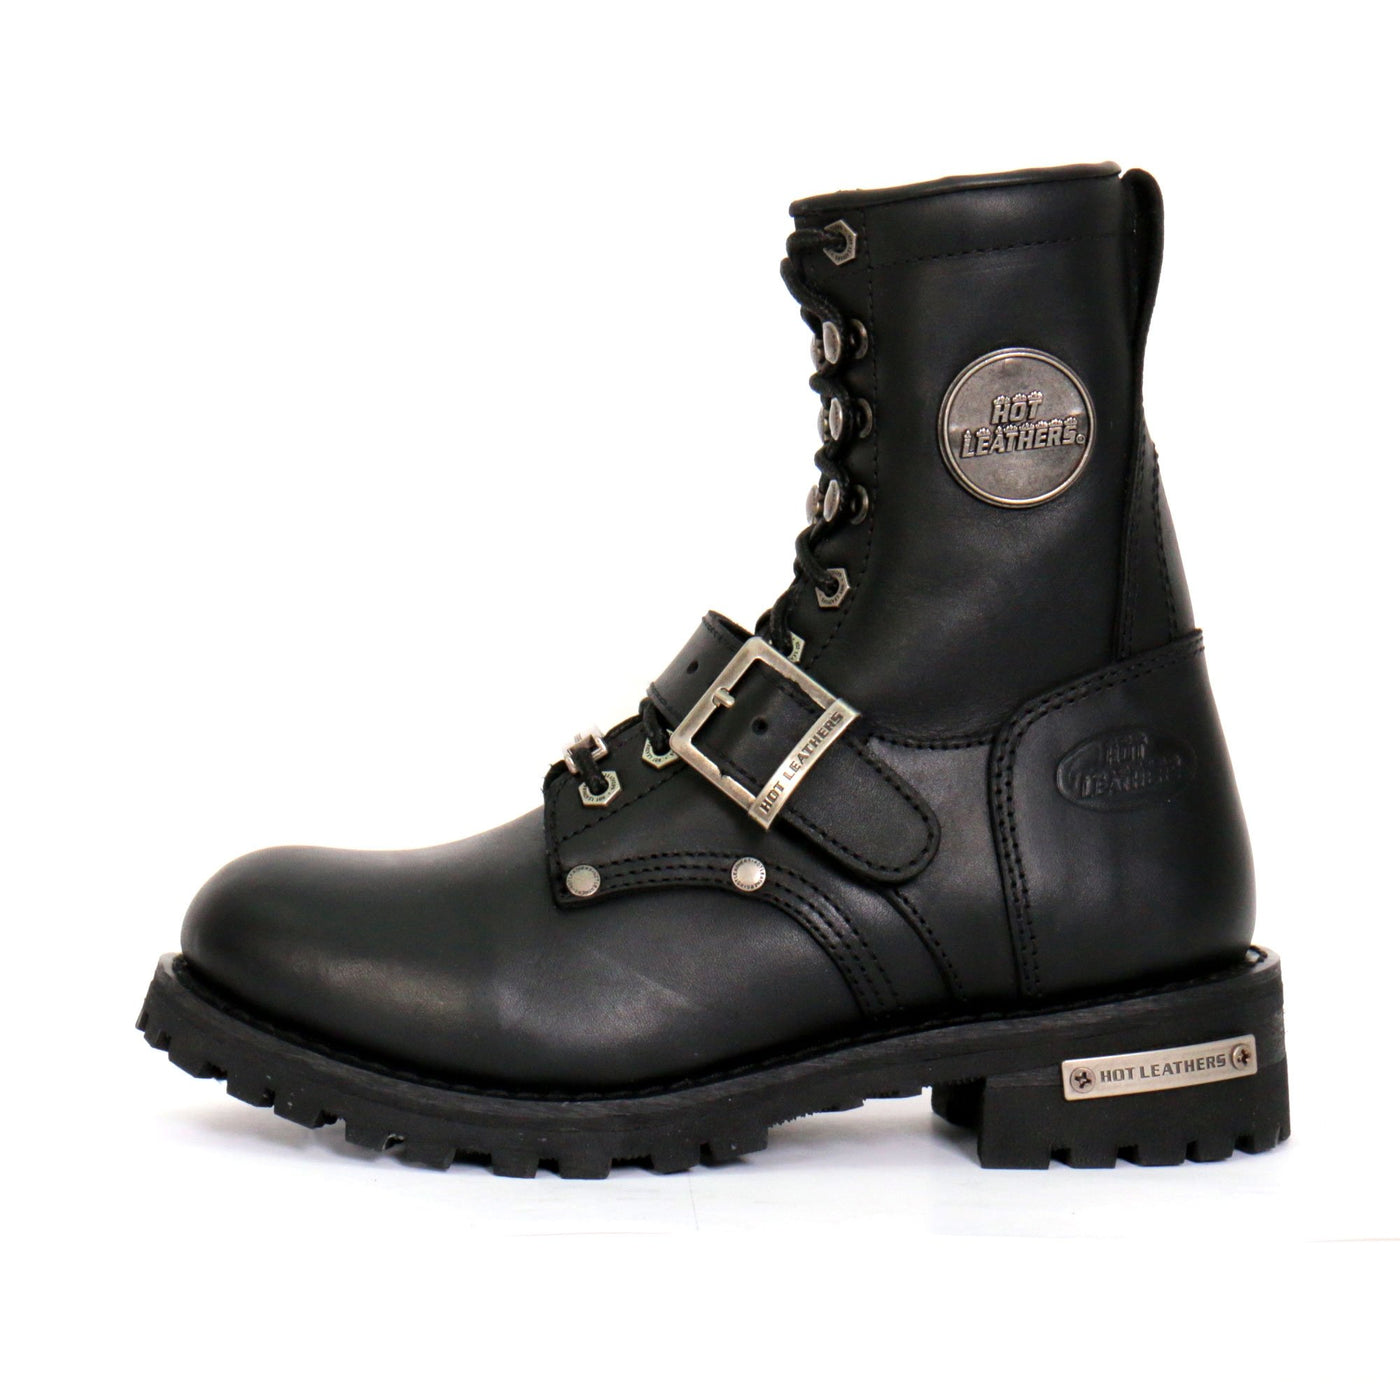 Hot Leathers Women's 7" Tall Logger Boots With Buckle